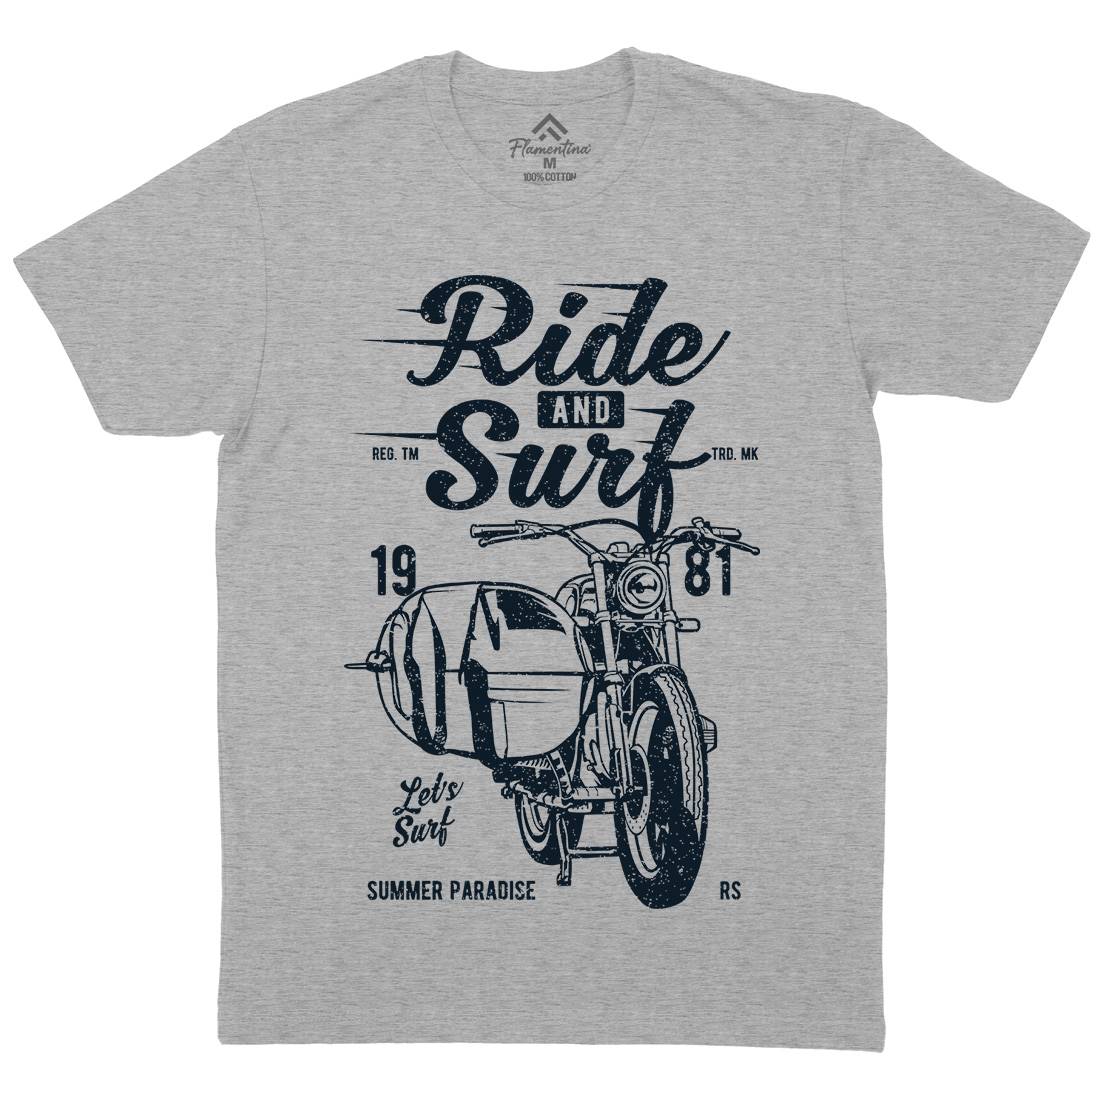 Ride And Mens Organic Crew Neck T-Shirt Surf A742